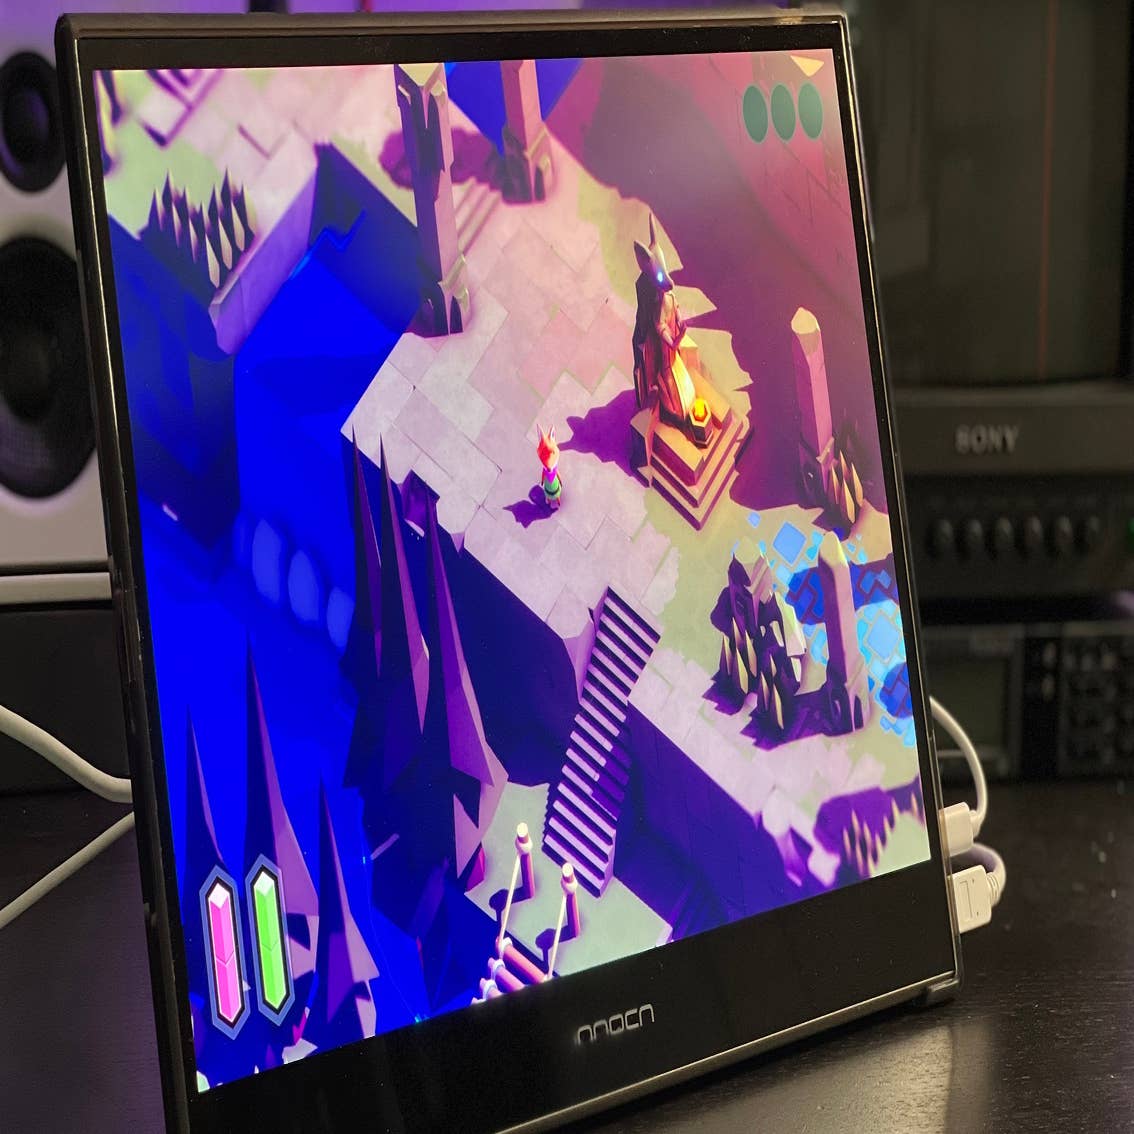 Innocn 15K1F portable OLED monitor: the Digital Foundry tech review